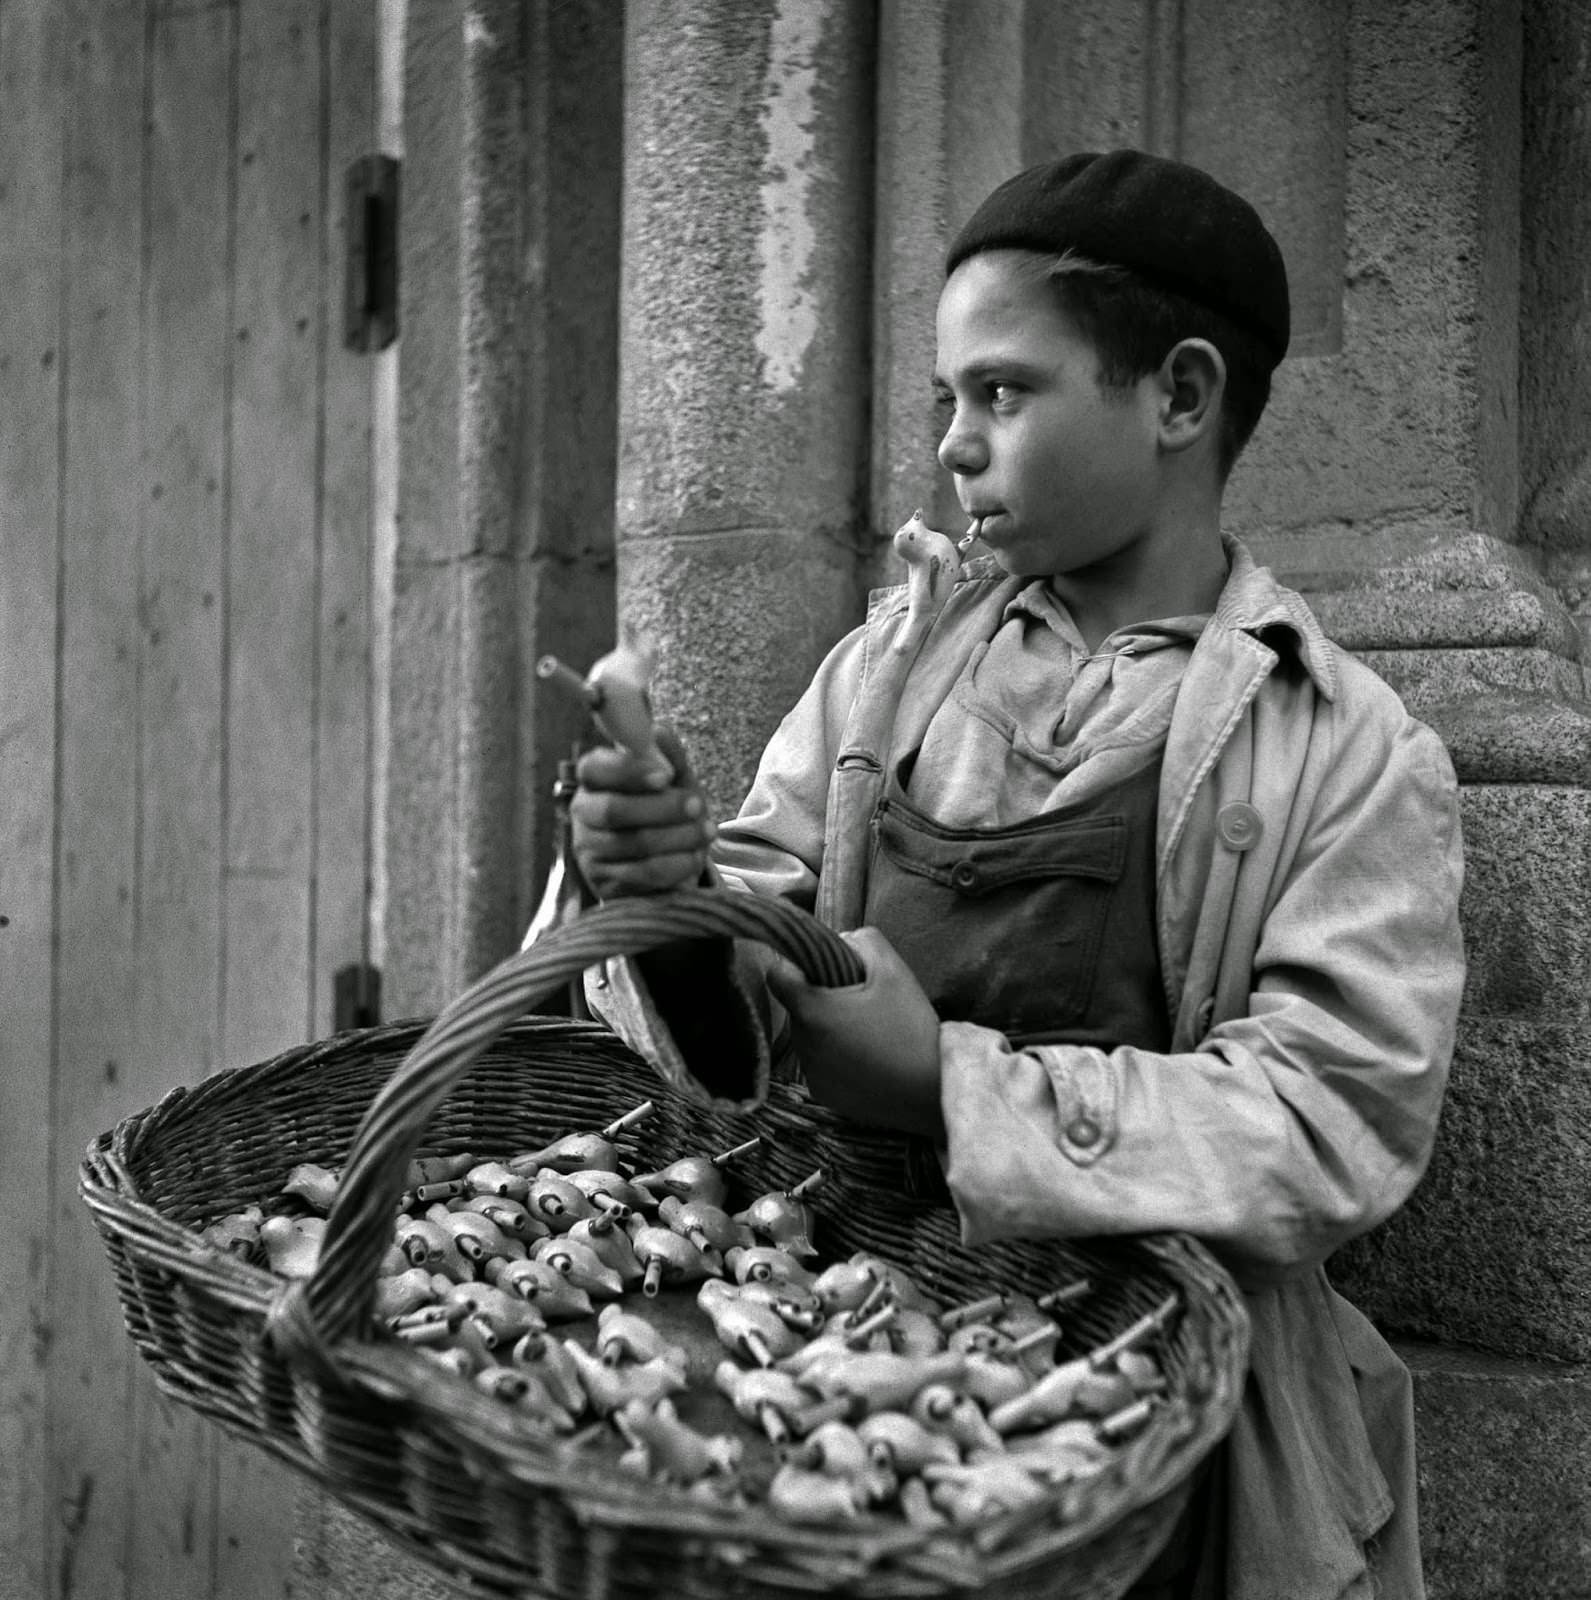 A boy selling bird whistles in Madrid, Spain in 1951.